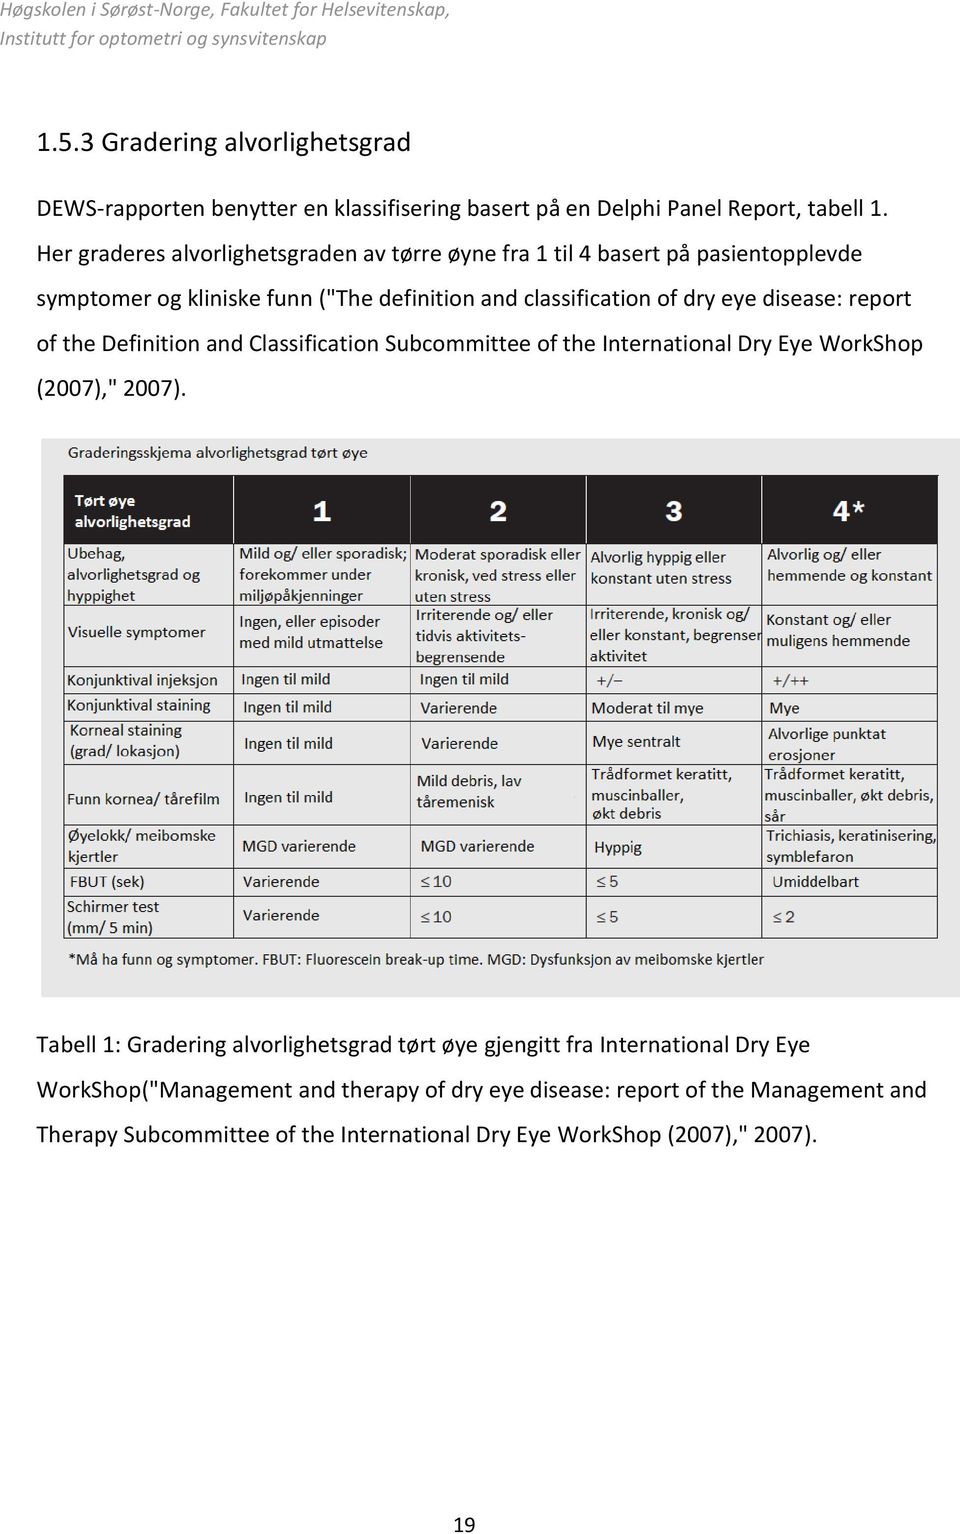 disease: report of the Definition and Classification Subcommittee of the International Dry Eye WorkShop (2007)," 2007).